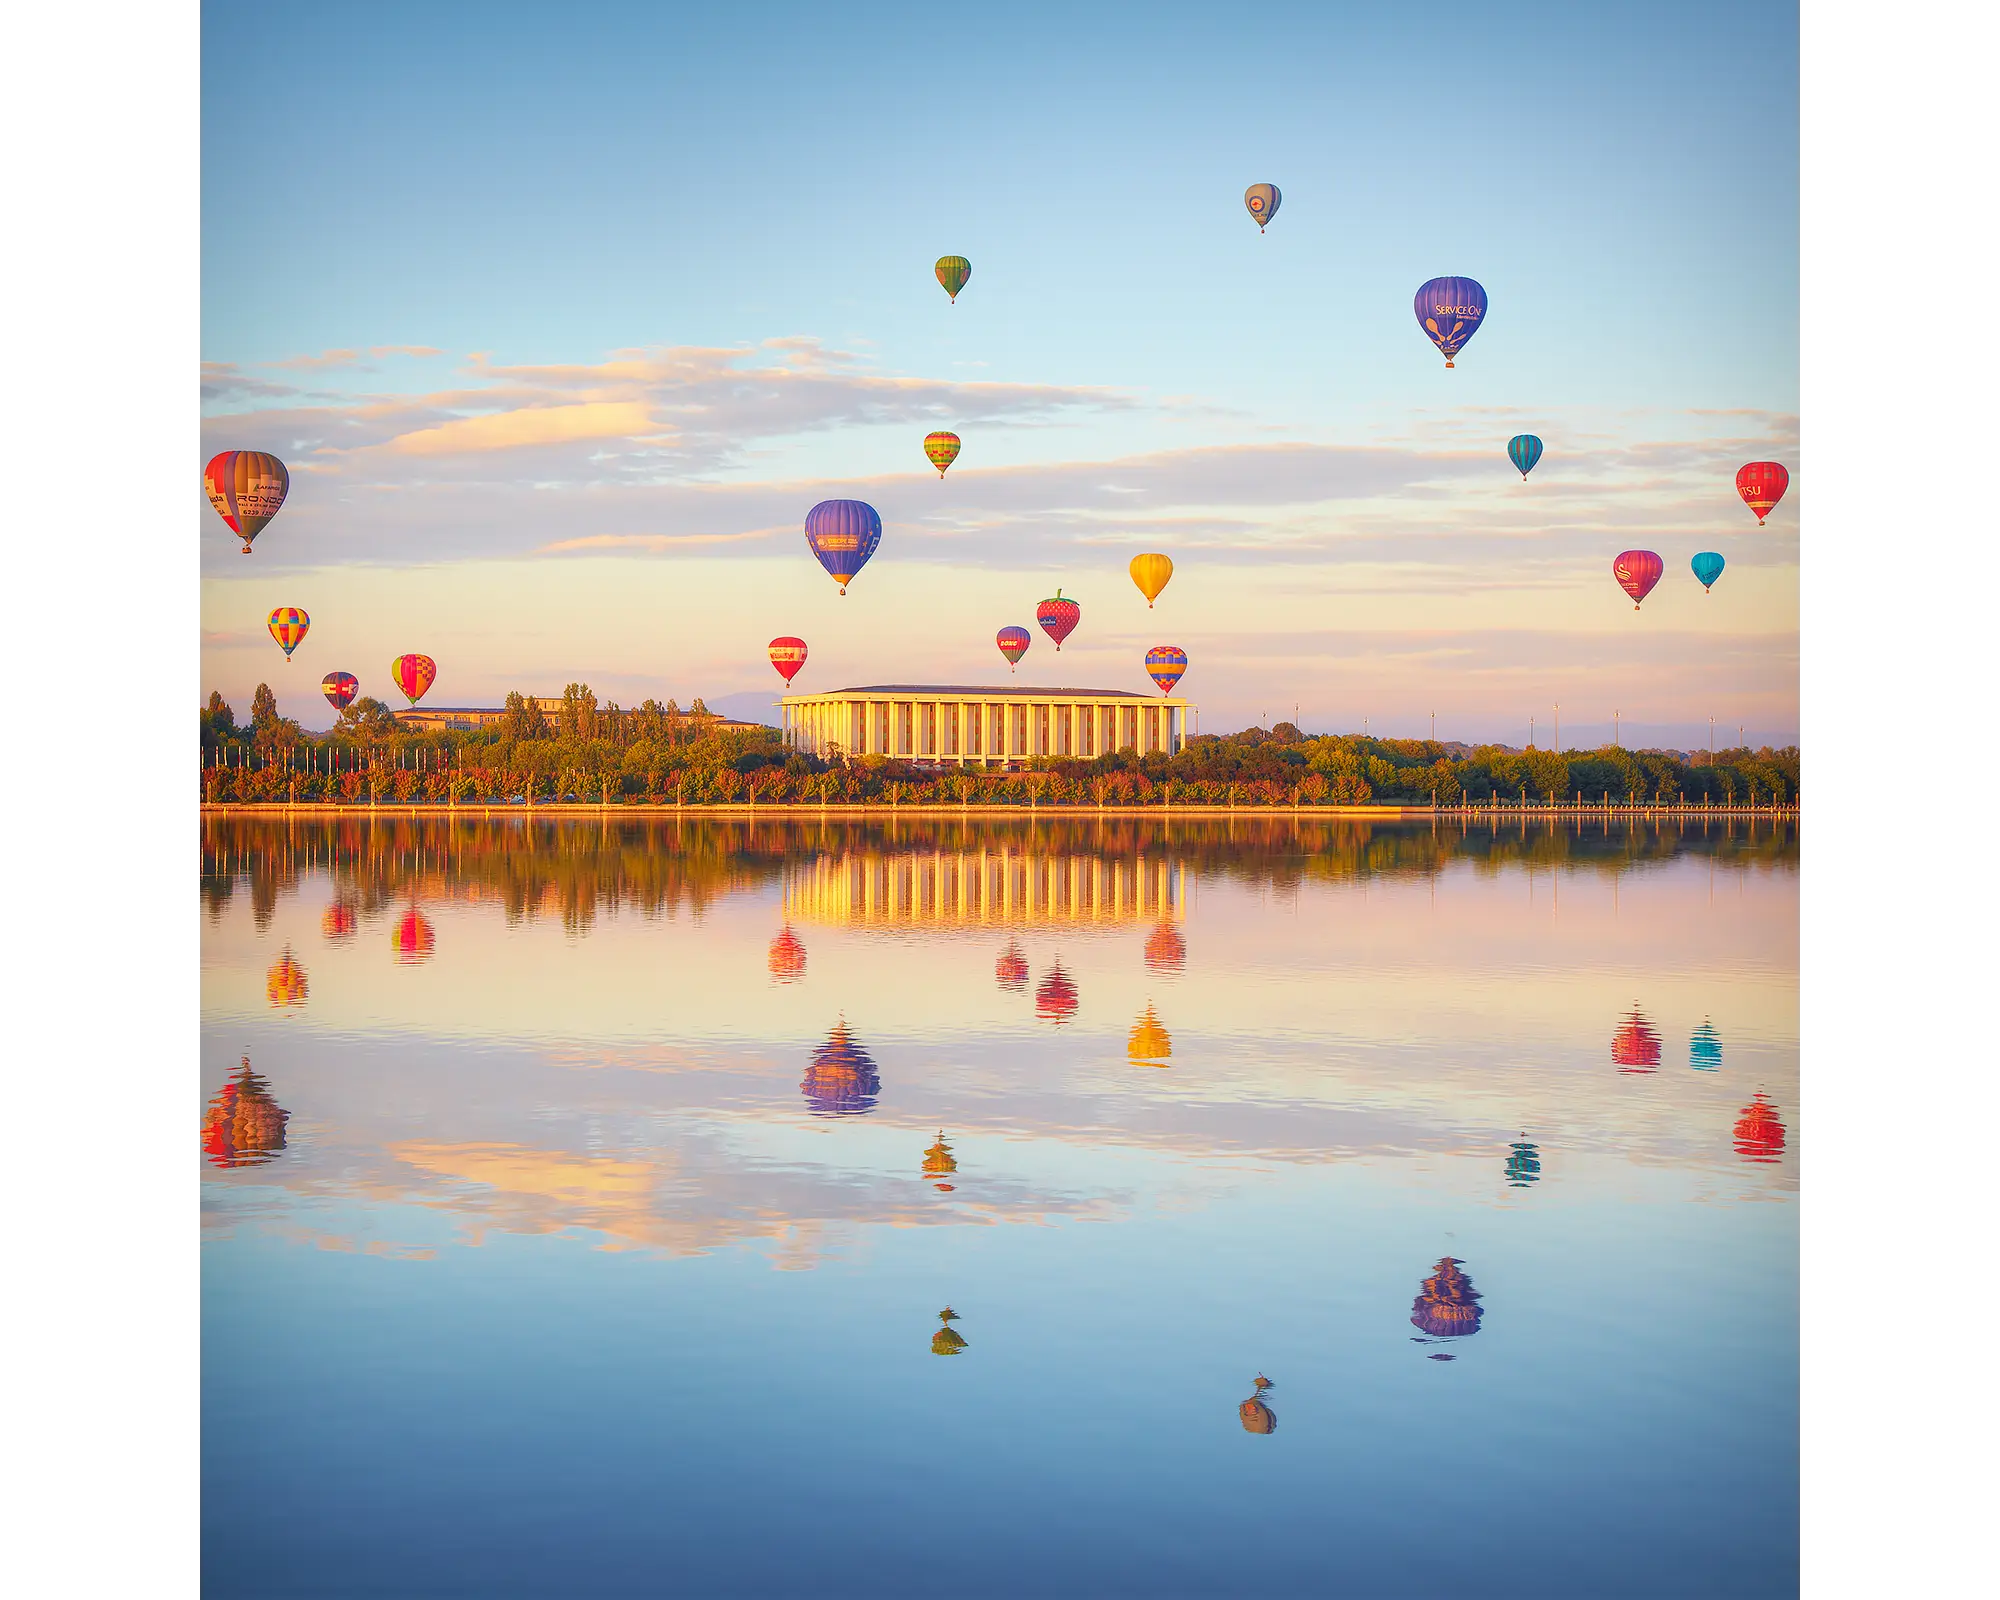 Balloon Spectacular. Hot air balloons over the National Library and Lake Burley Griffin at sunrise, Canberra.